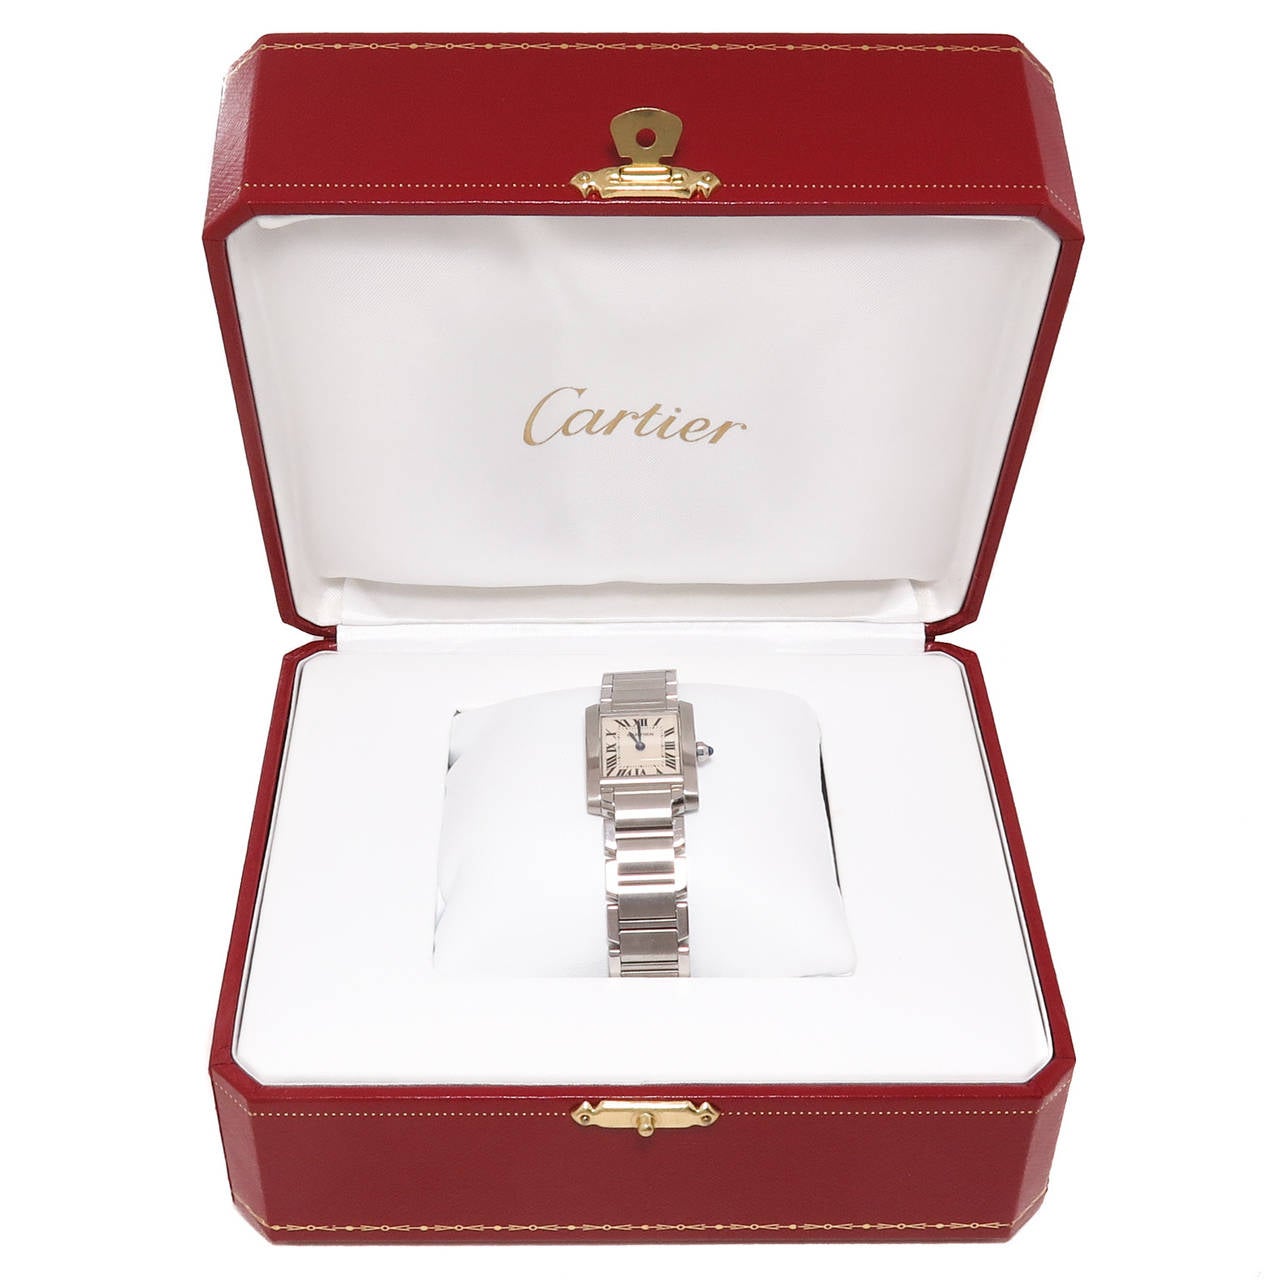 Circa 2014 Cartier Ladies Stainless Steel Tank Francaise Wrist Watch, 25 X 20 MM Water Resistant Case, Quartz Movement, Scratch Resistant Crystal, Sapphire Crown, White Dial with Black Roman Numerals. Steel Bracelet with Deployment fold over clasp.